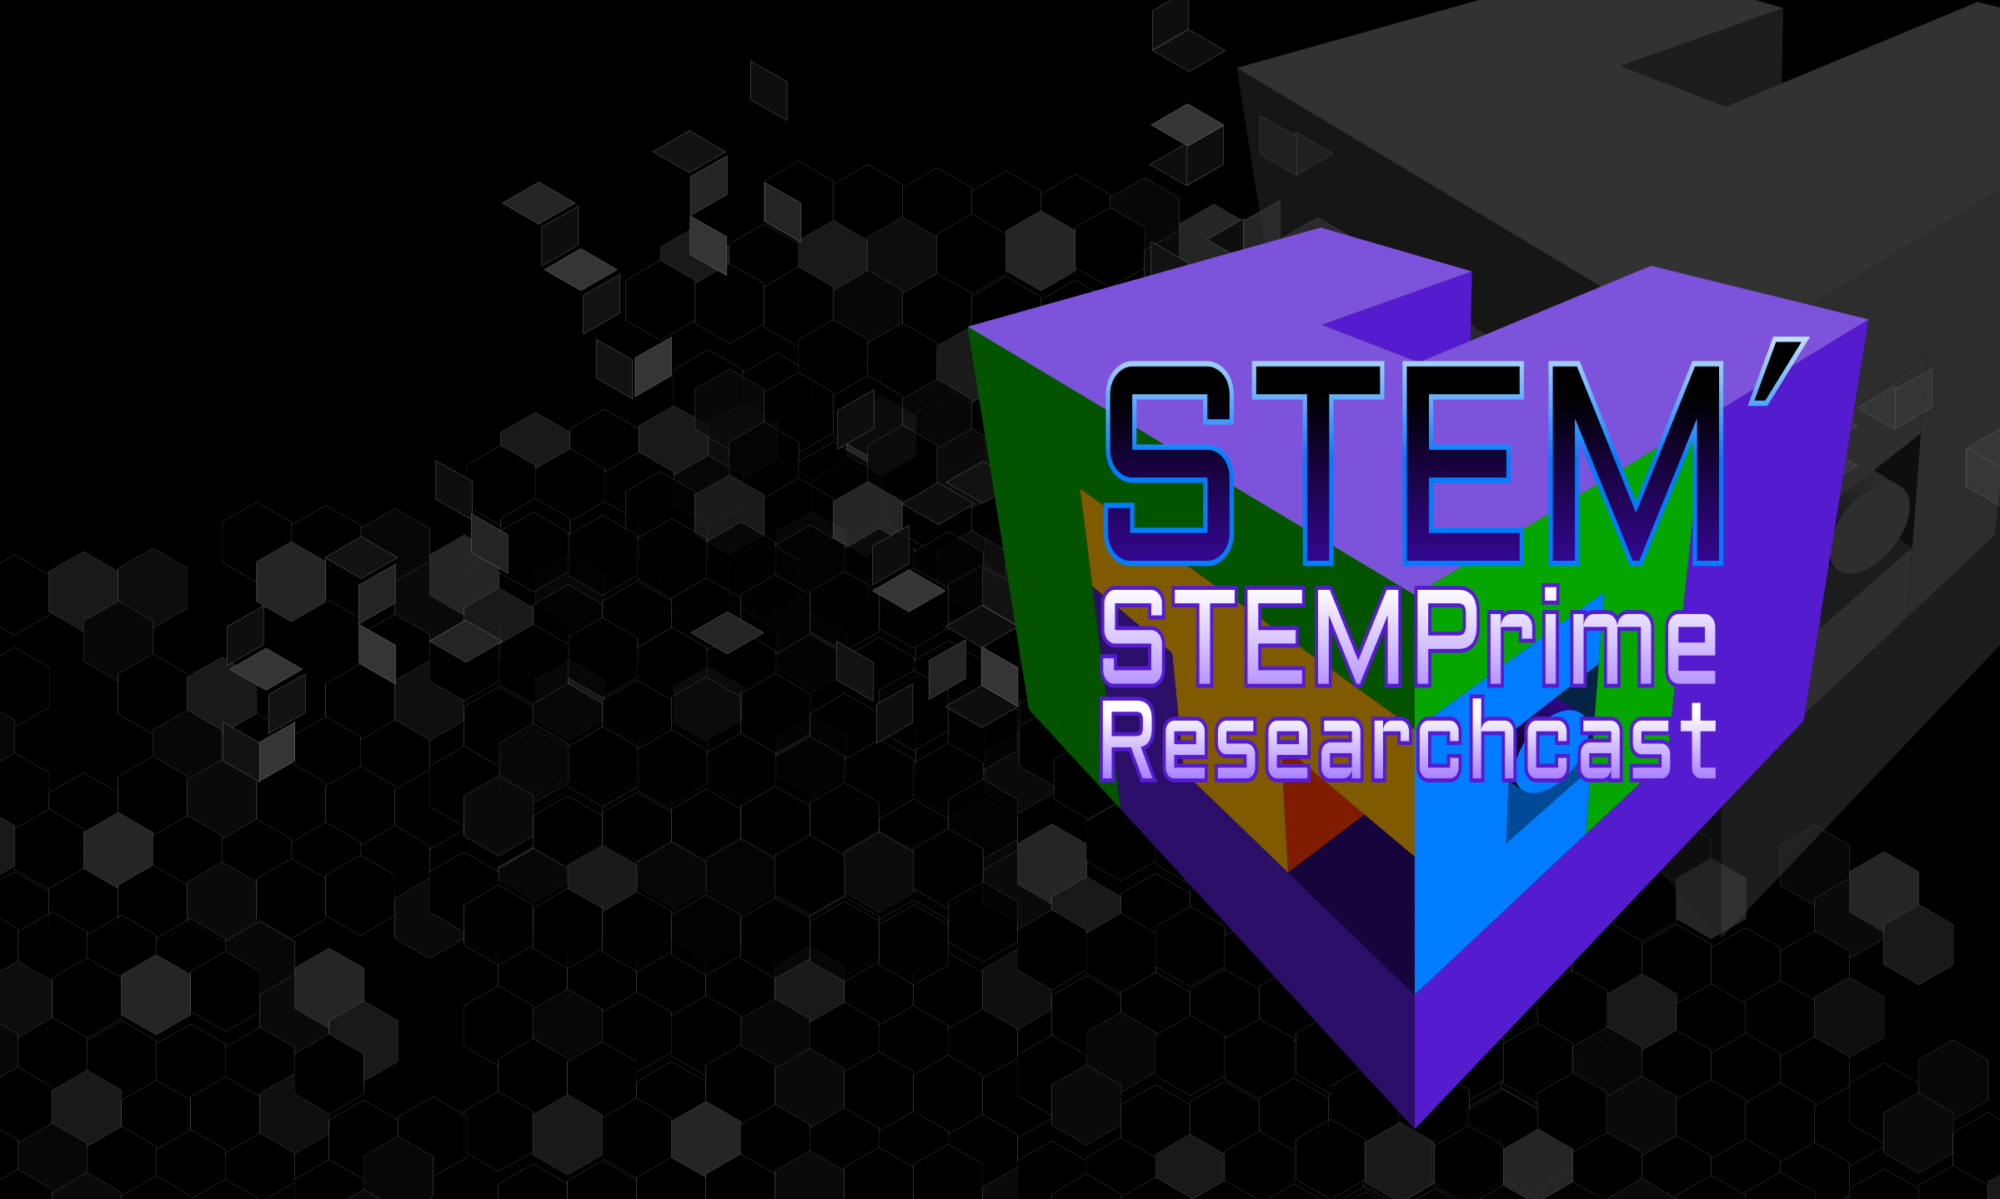 The STEMPrime Researchcast